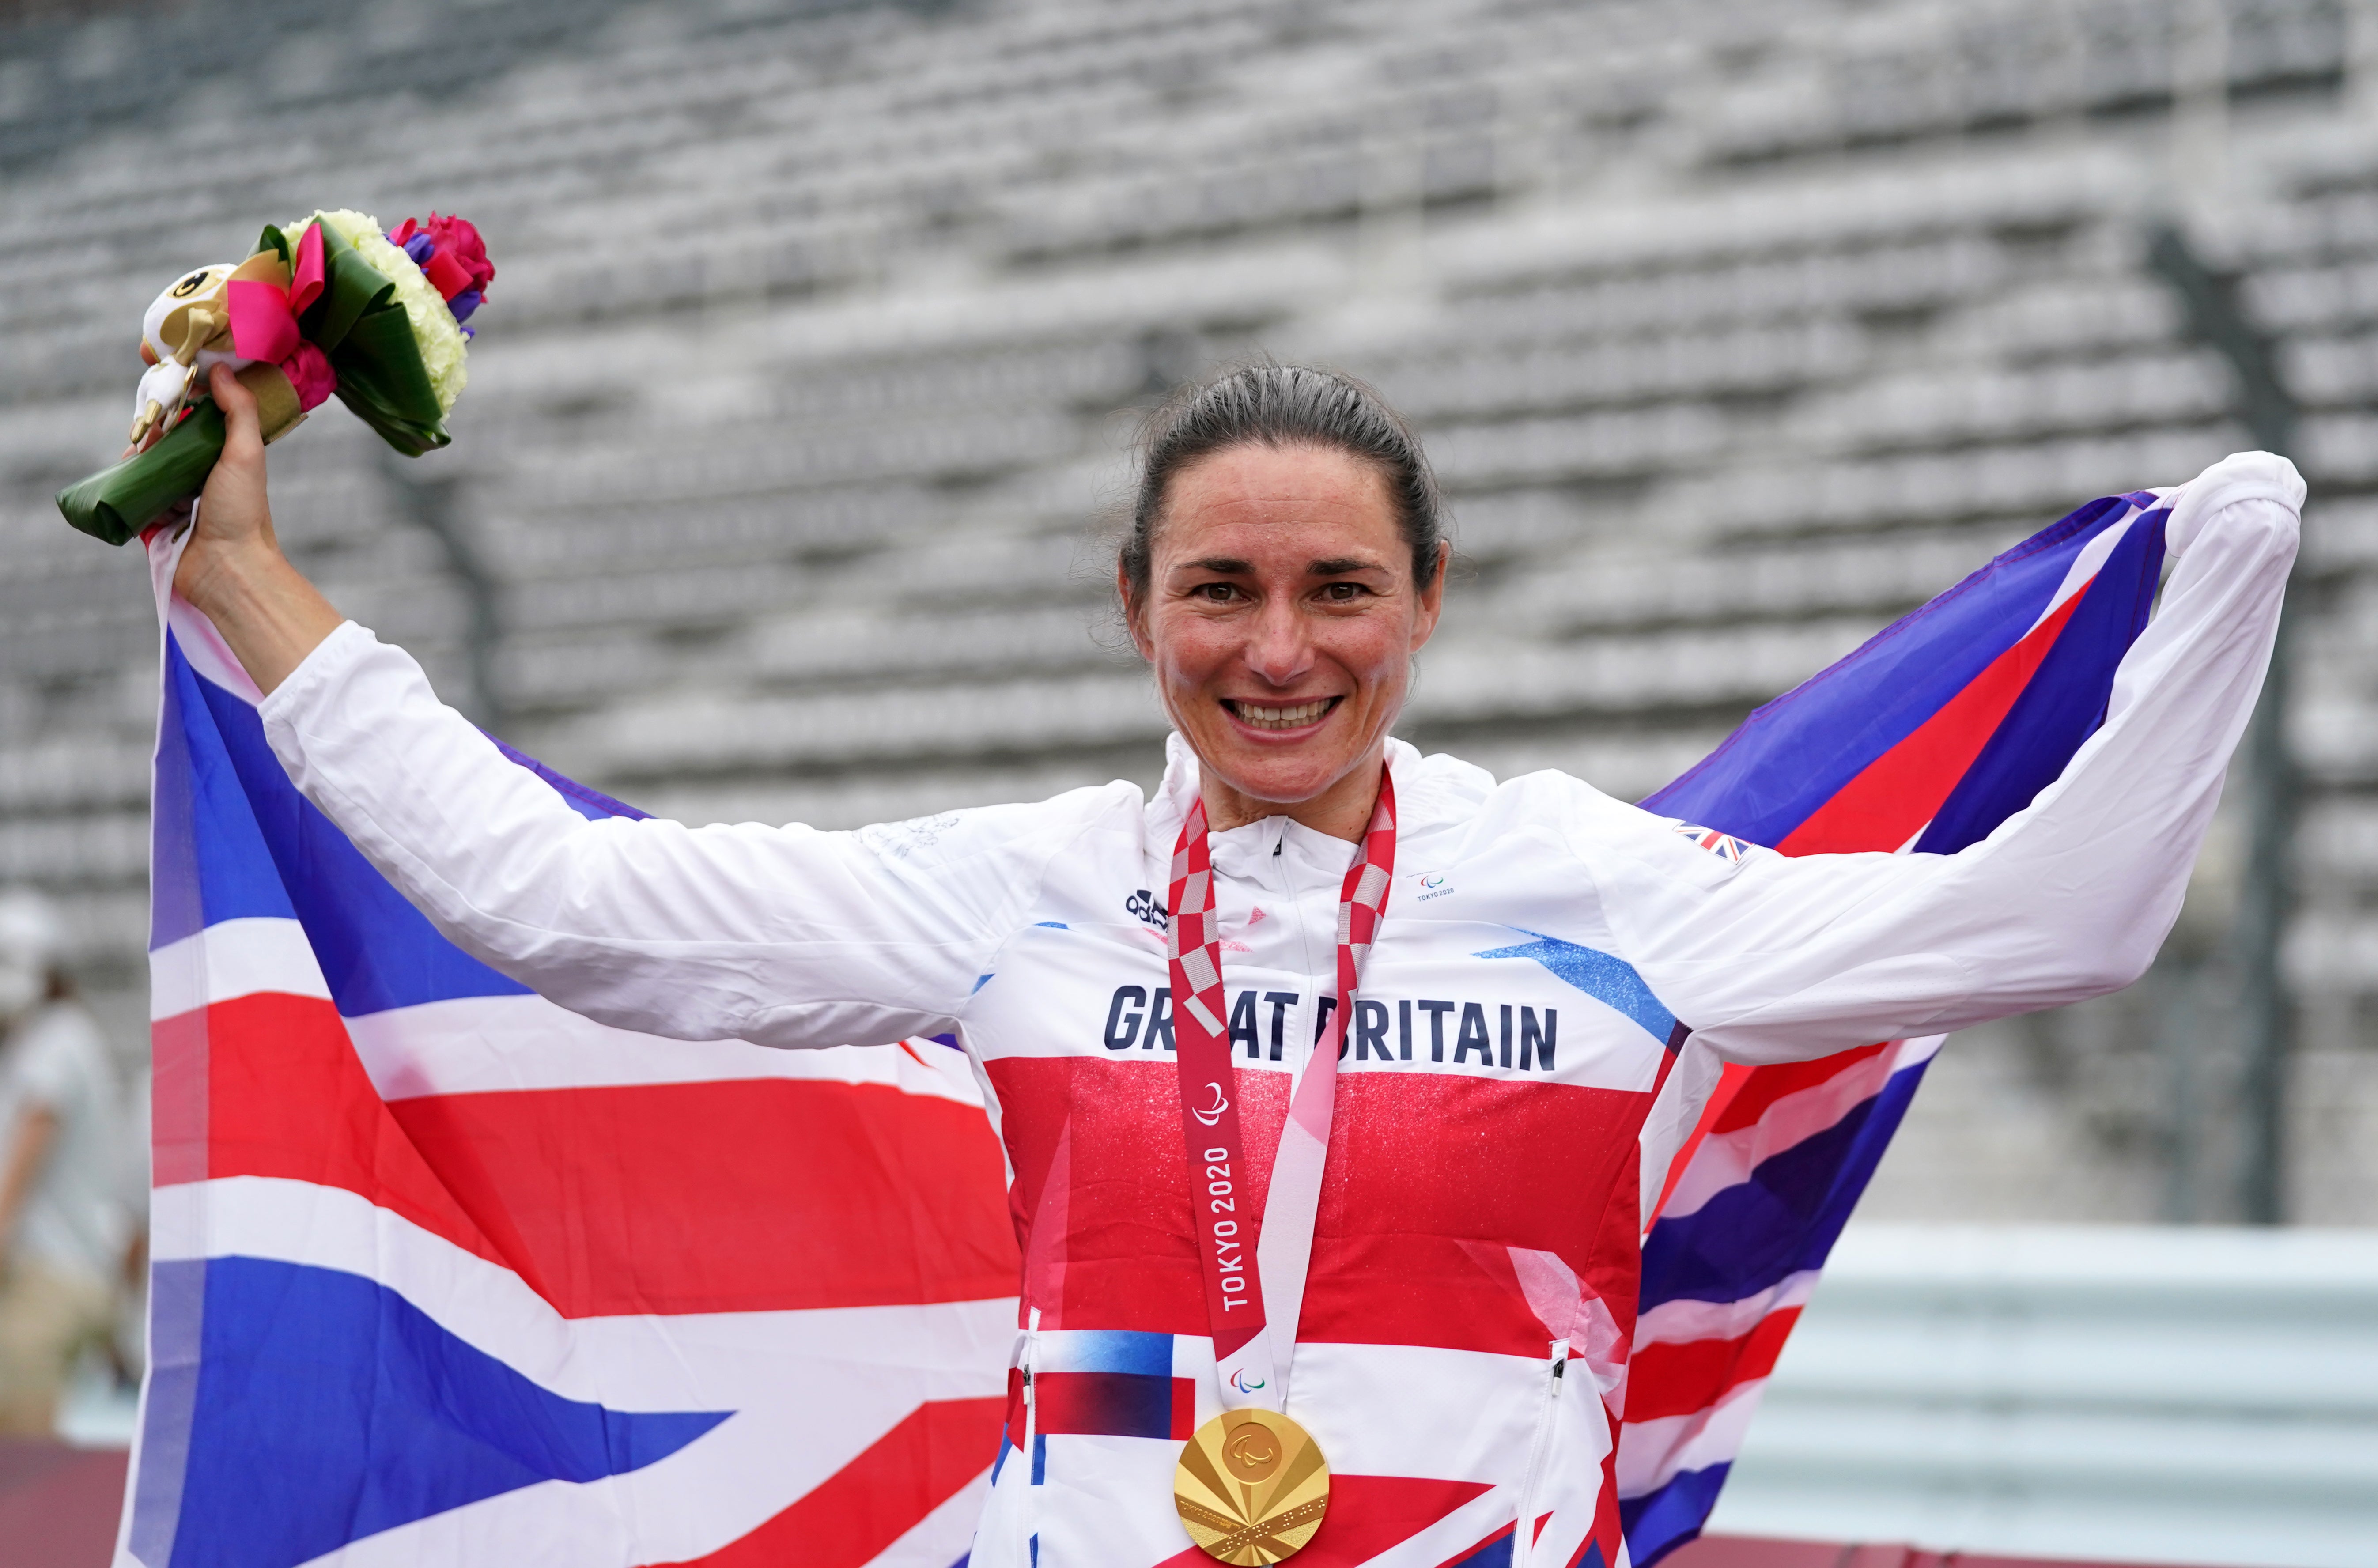 Sarah Storey celebrates after winning gold in the women’s C5 time trial